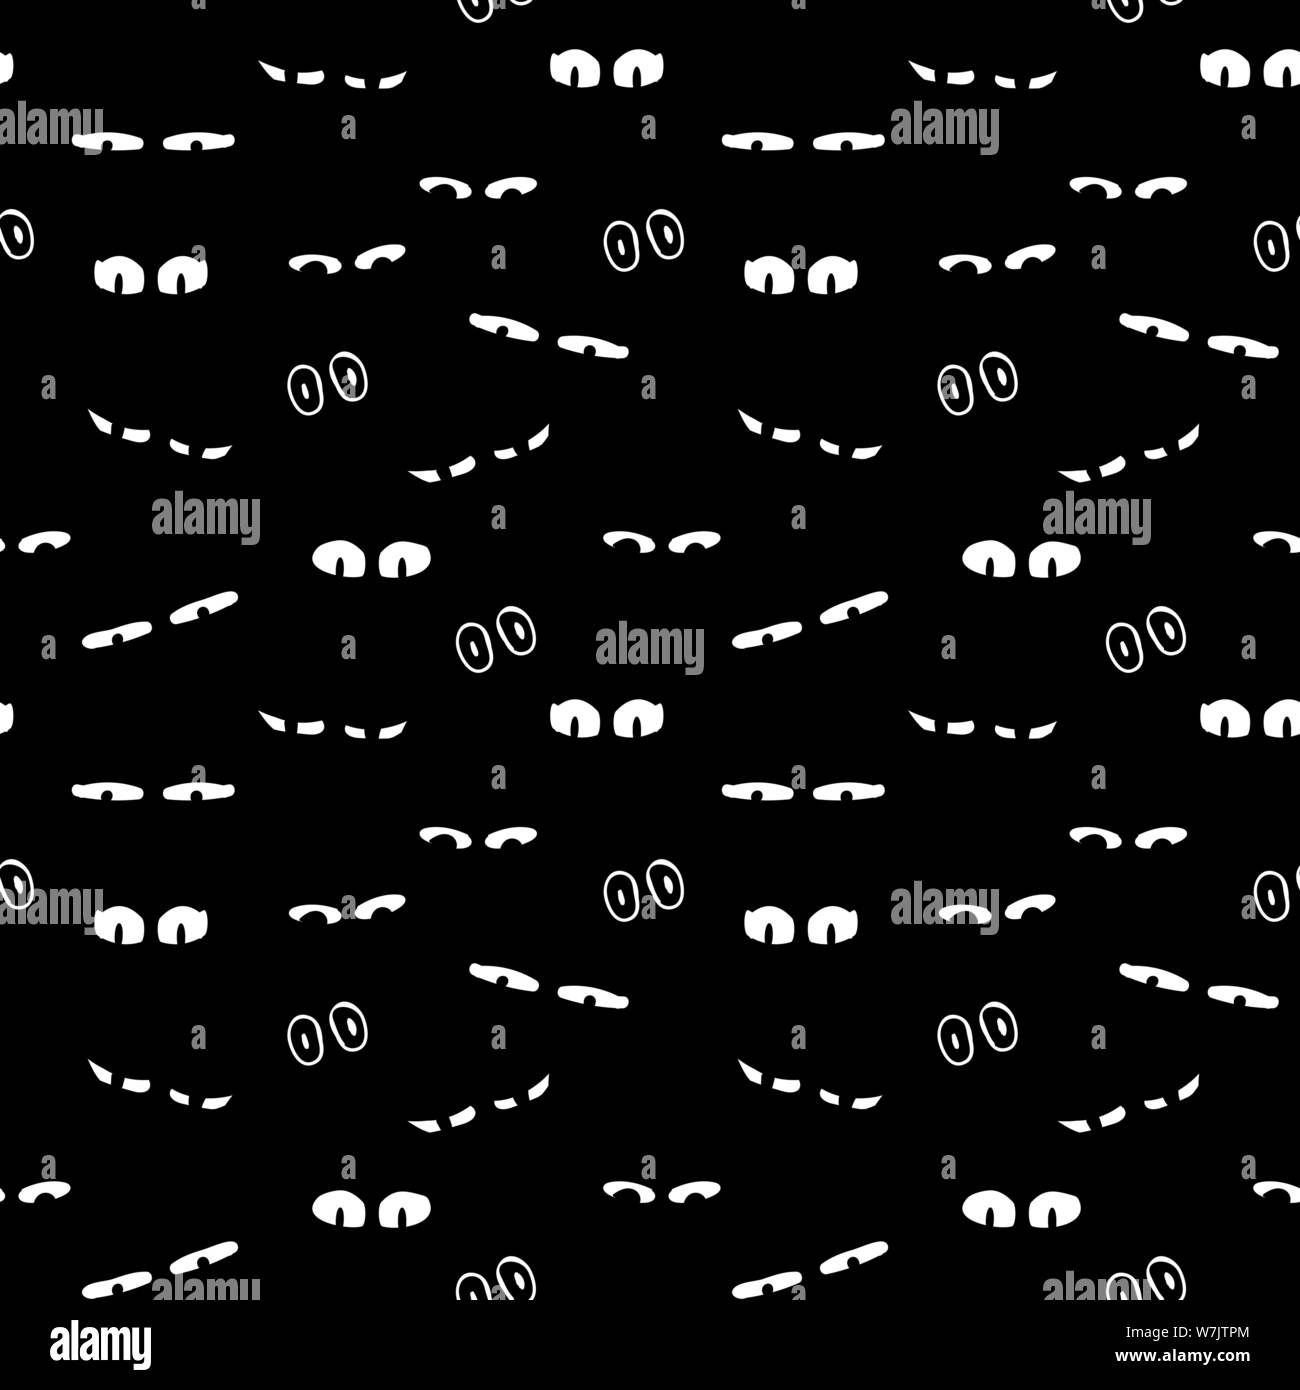 seamless vector halloween background pattern with spooky lurking eyes Stock Vector